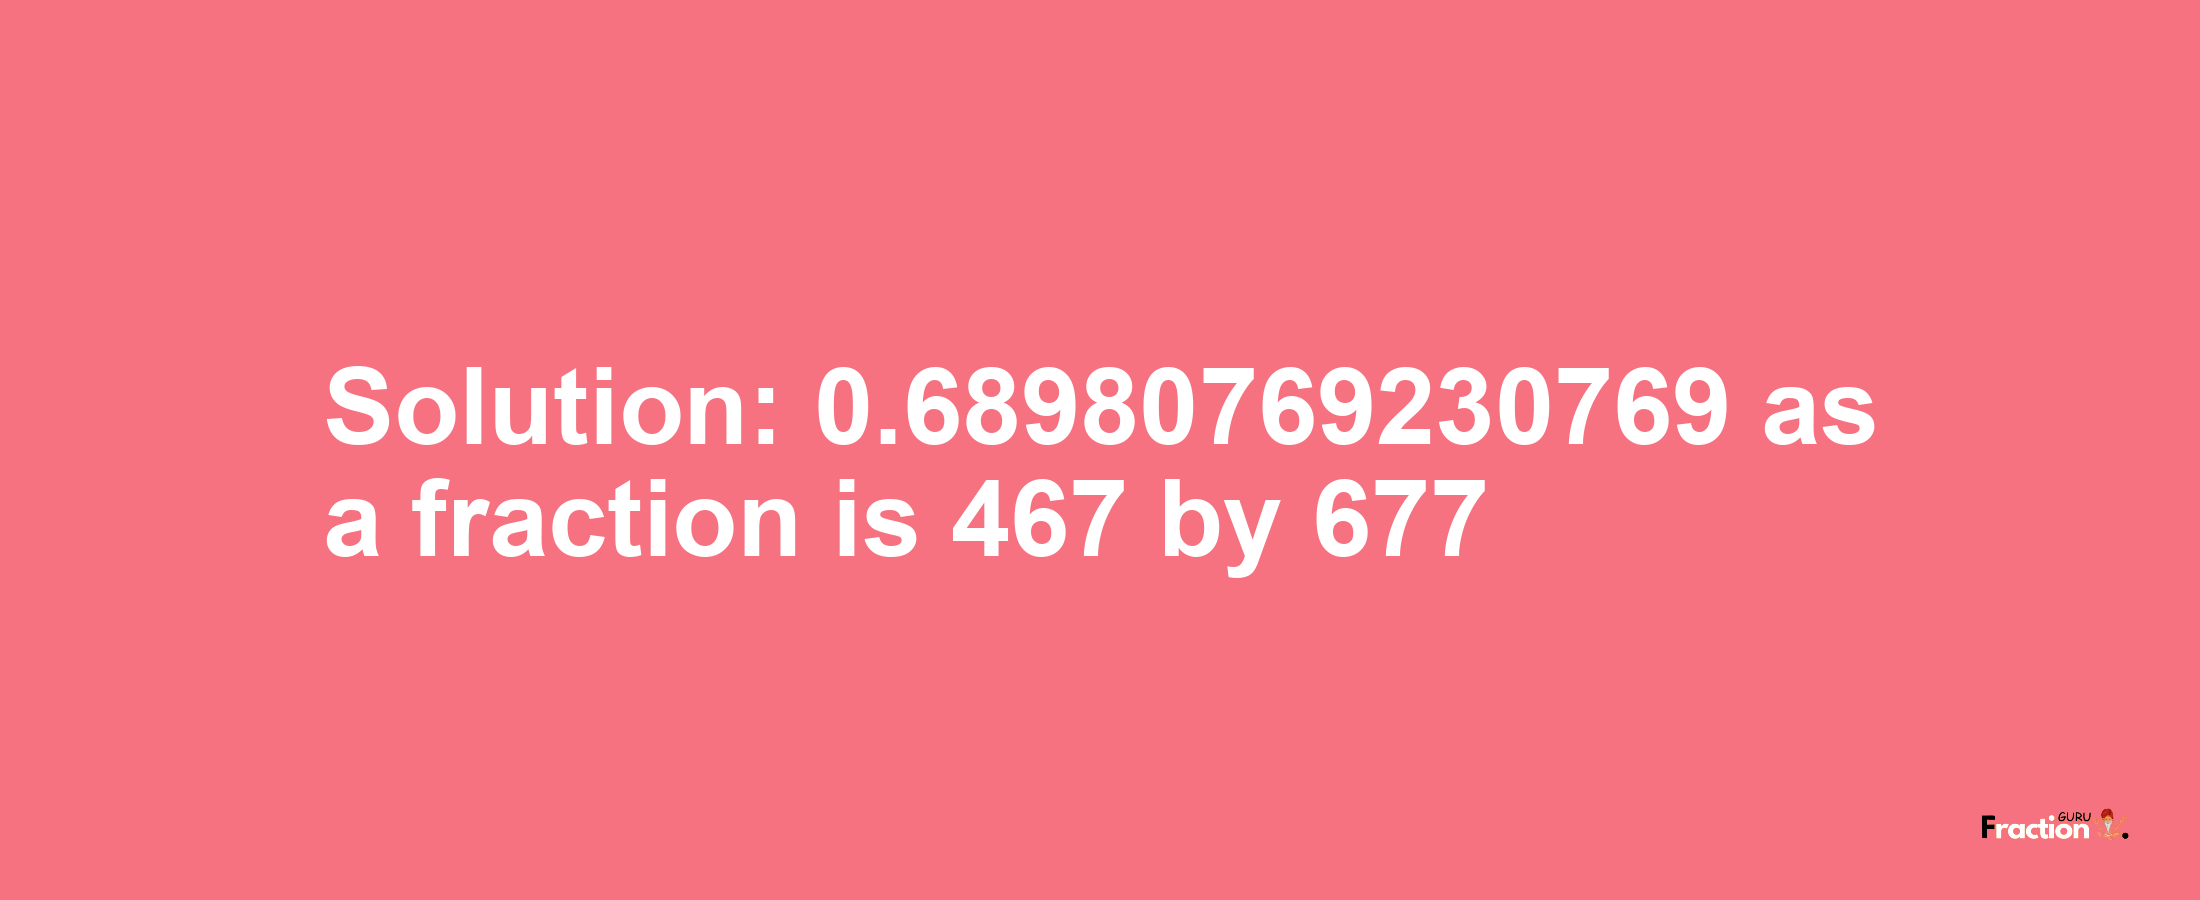 Solution:0.68980769230769 as a fraction is 467/677